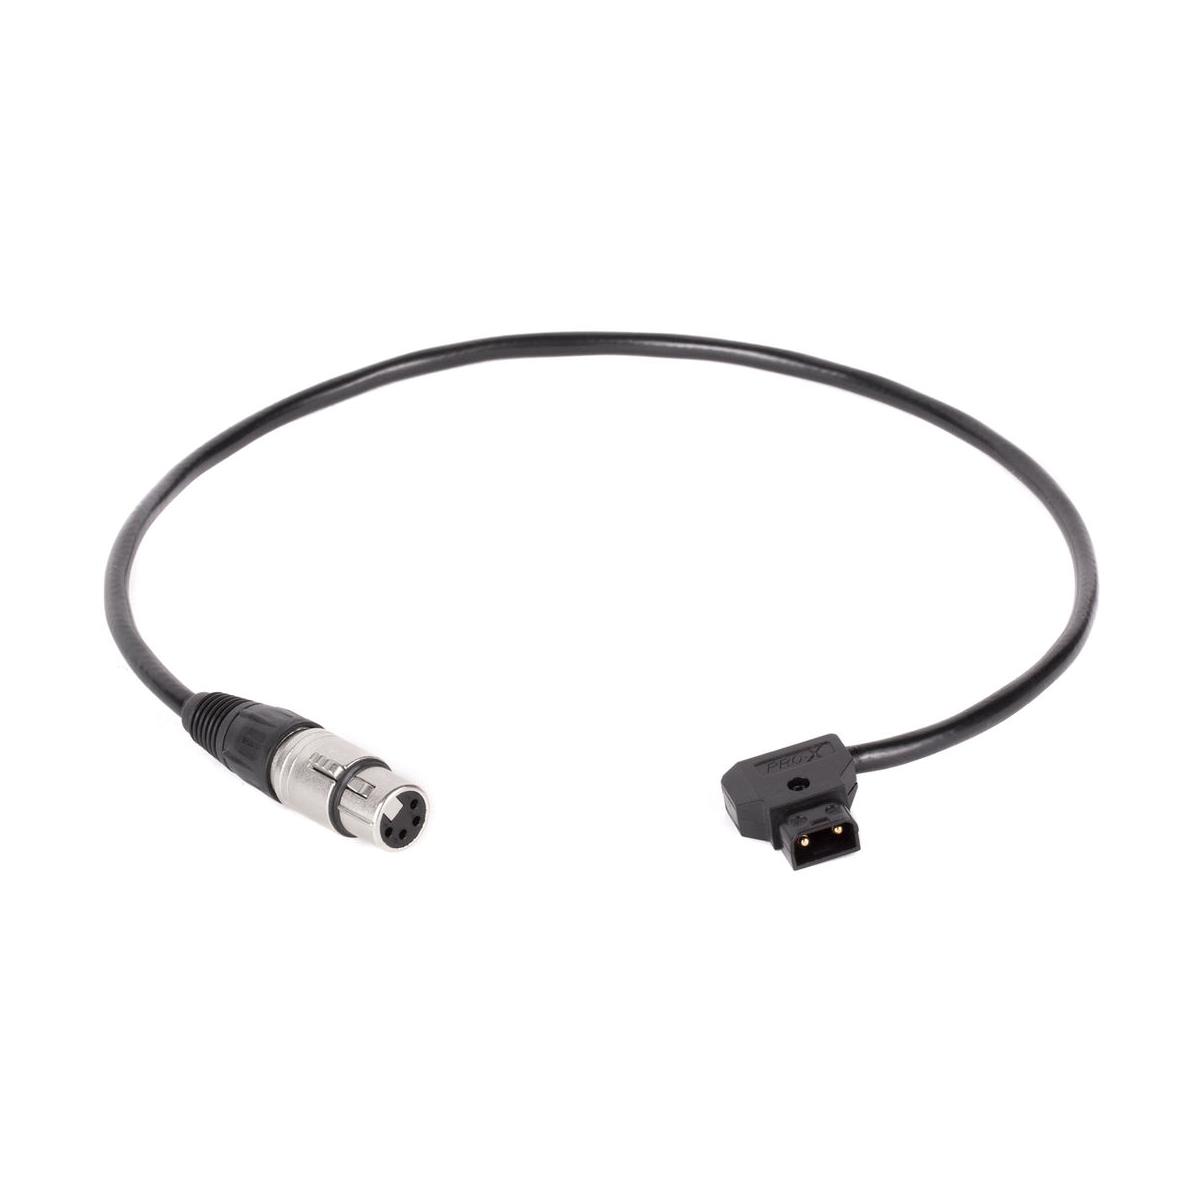 Photos - Cable (video, audio, USB) Wooden Camera 20" D-Tap to 4-Pin XLR Female Straight Power Cable 2502 